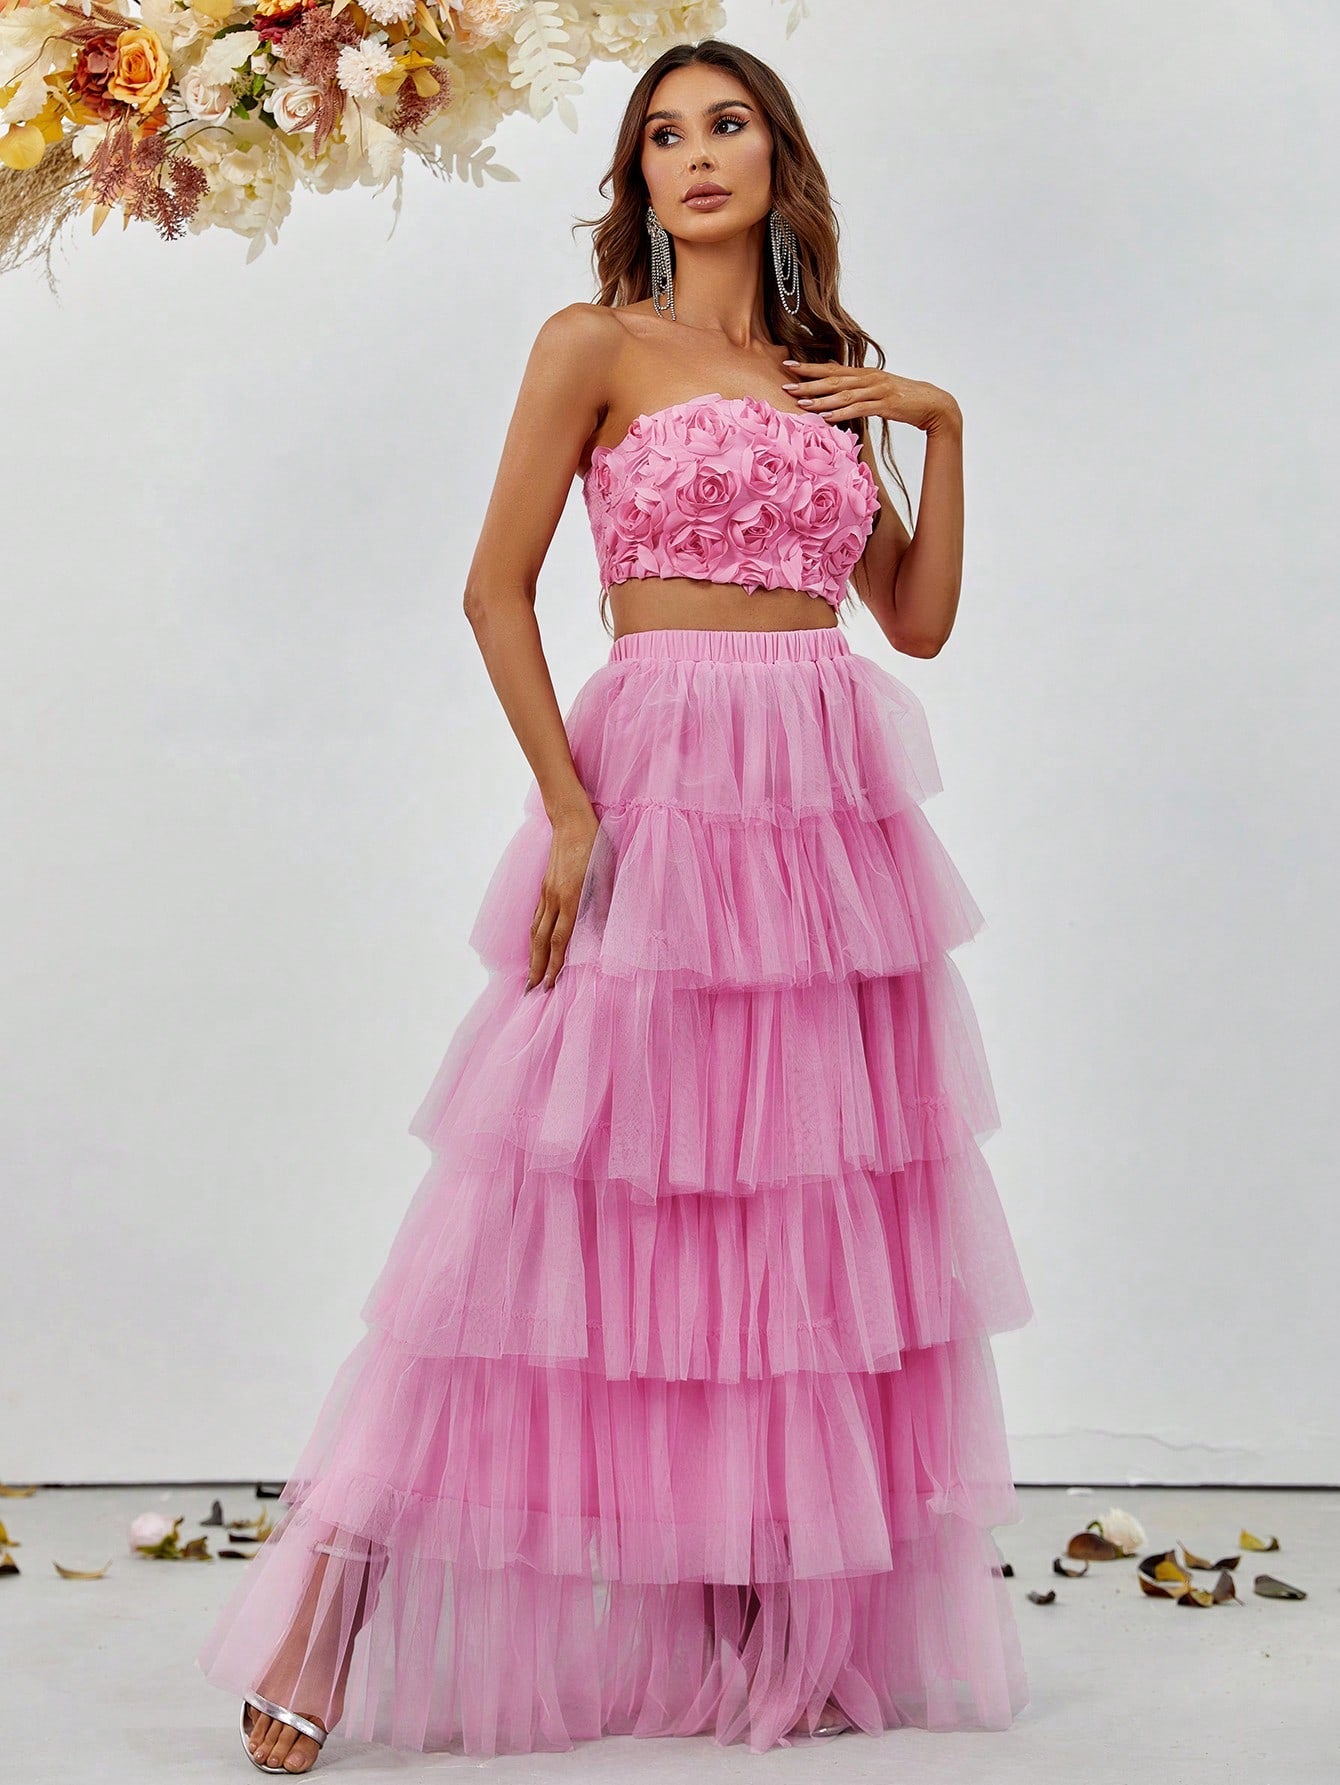 3D Flower Tube Top & Tiered Maxi Skirt